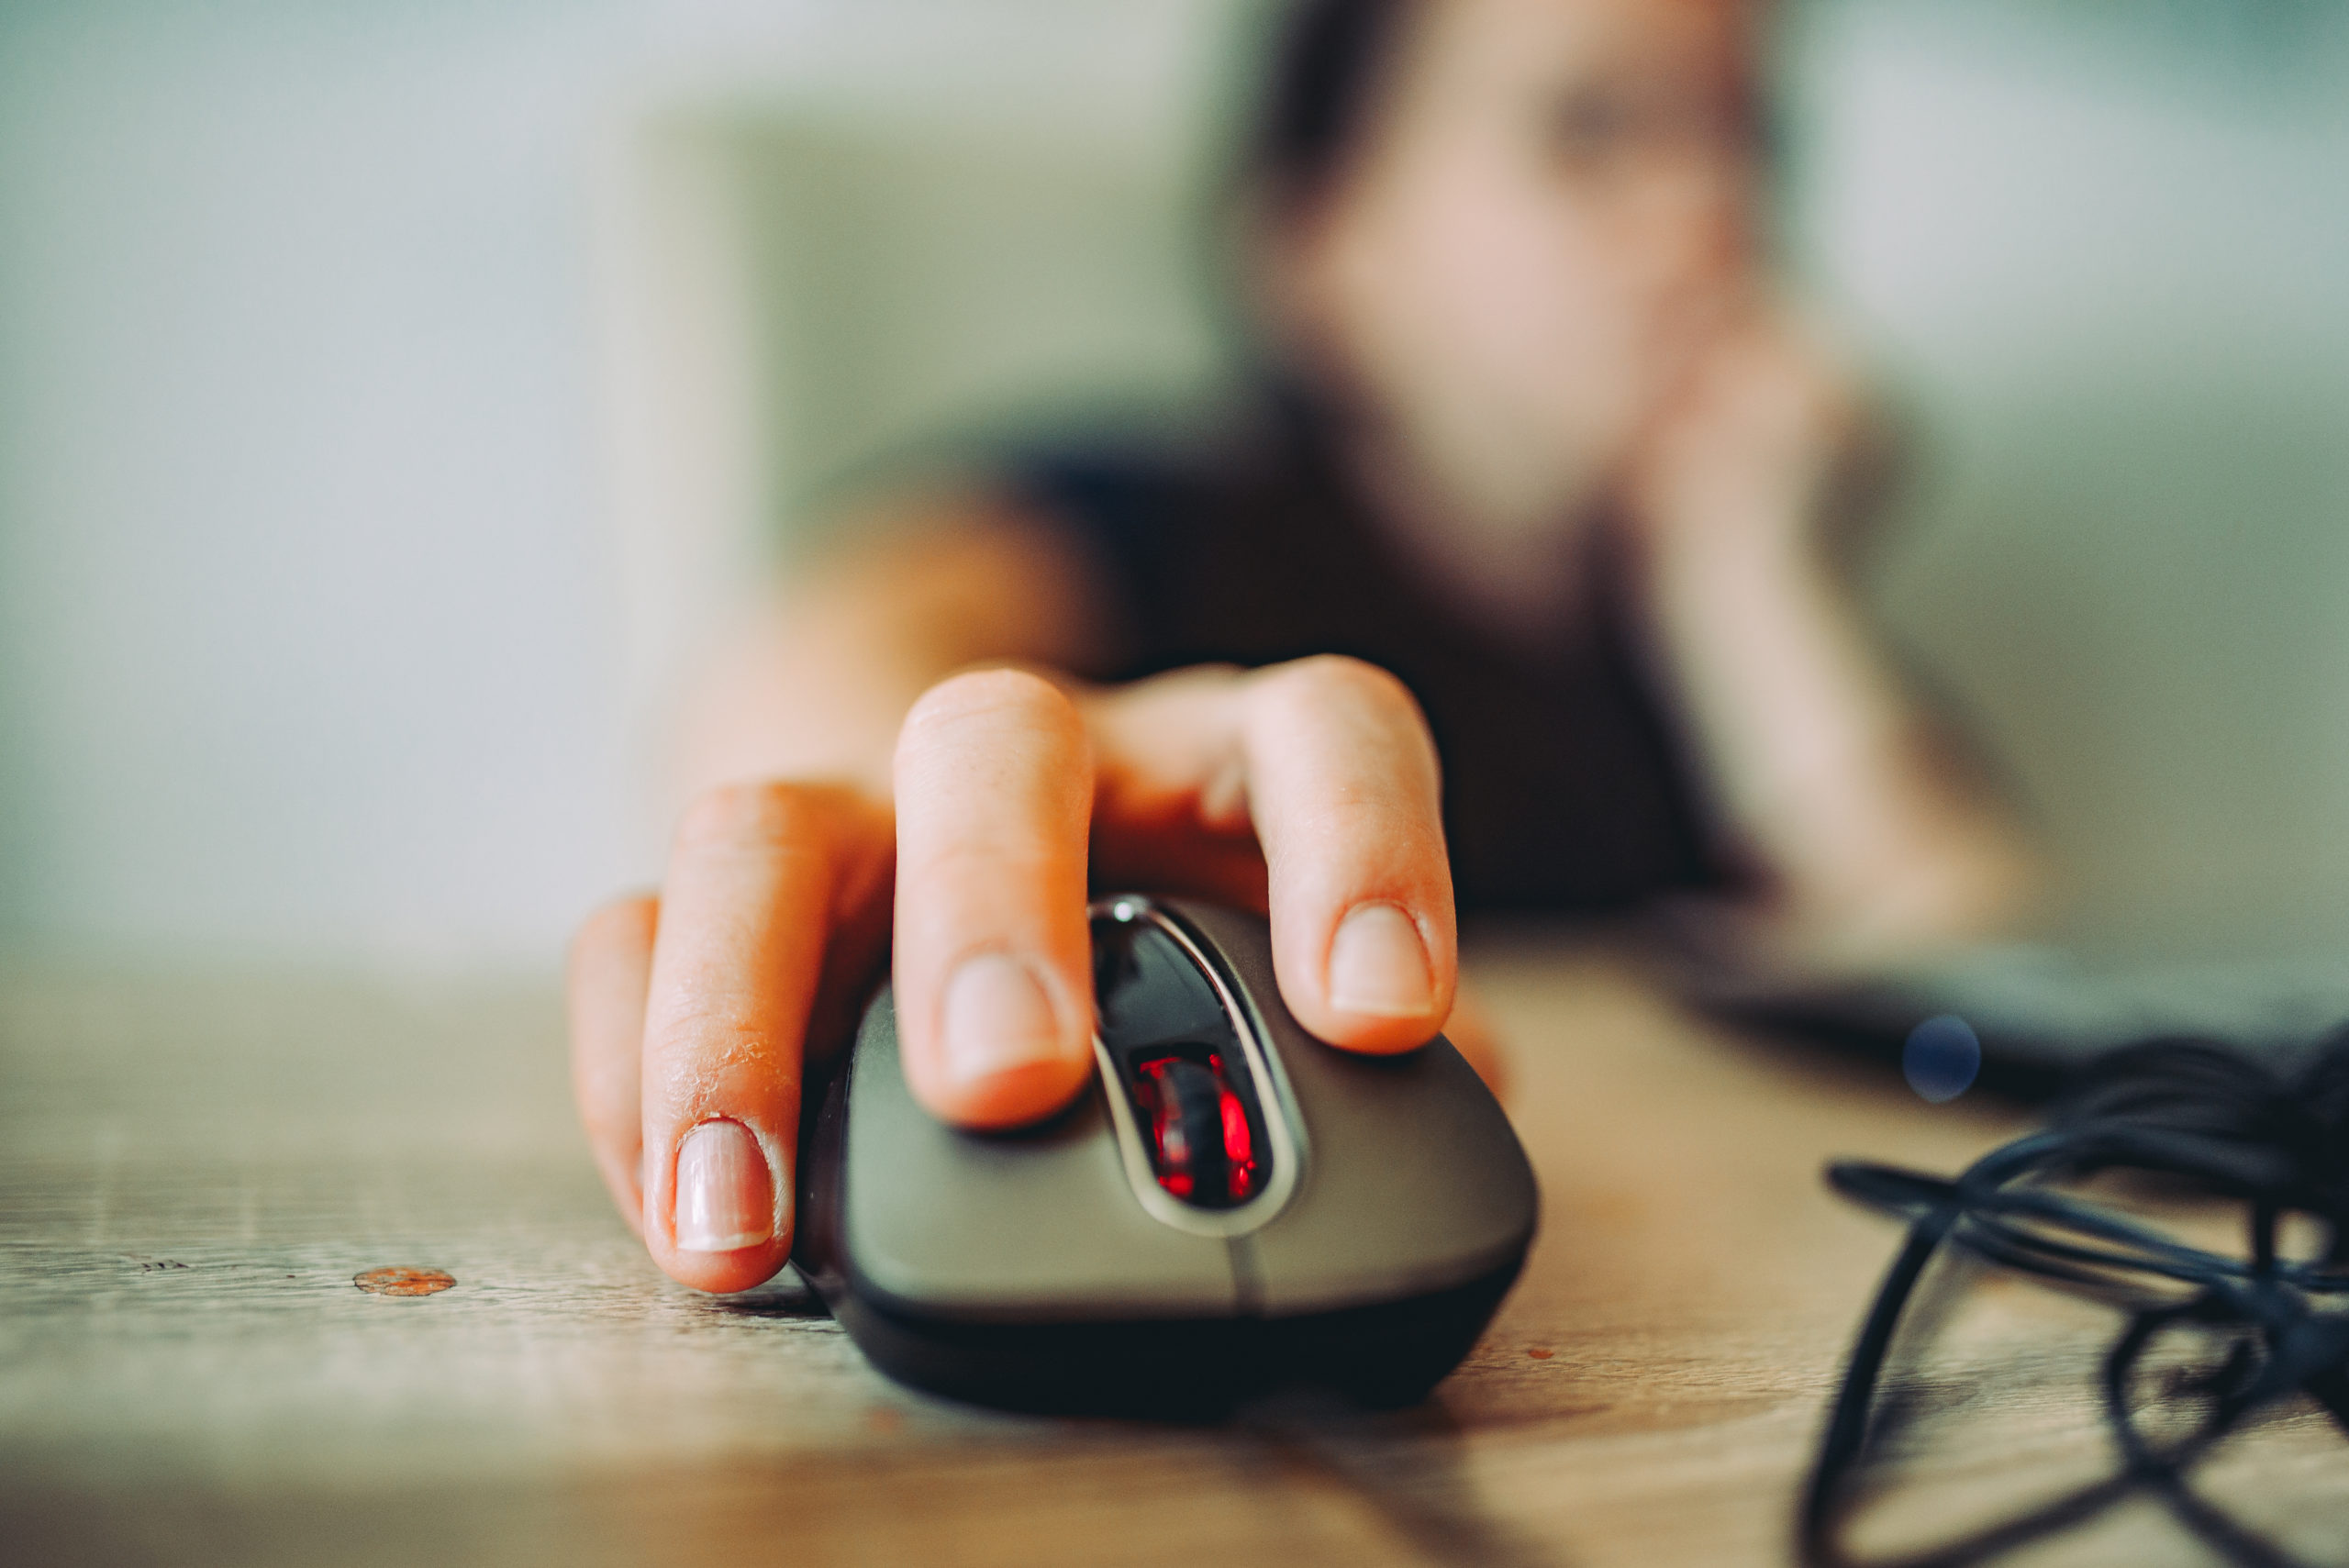 person on a computer clicking on a mouse